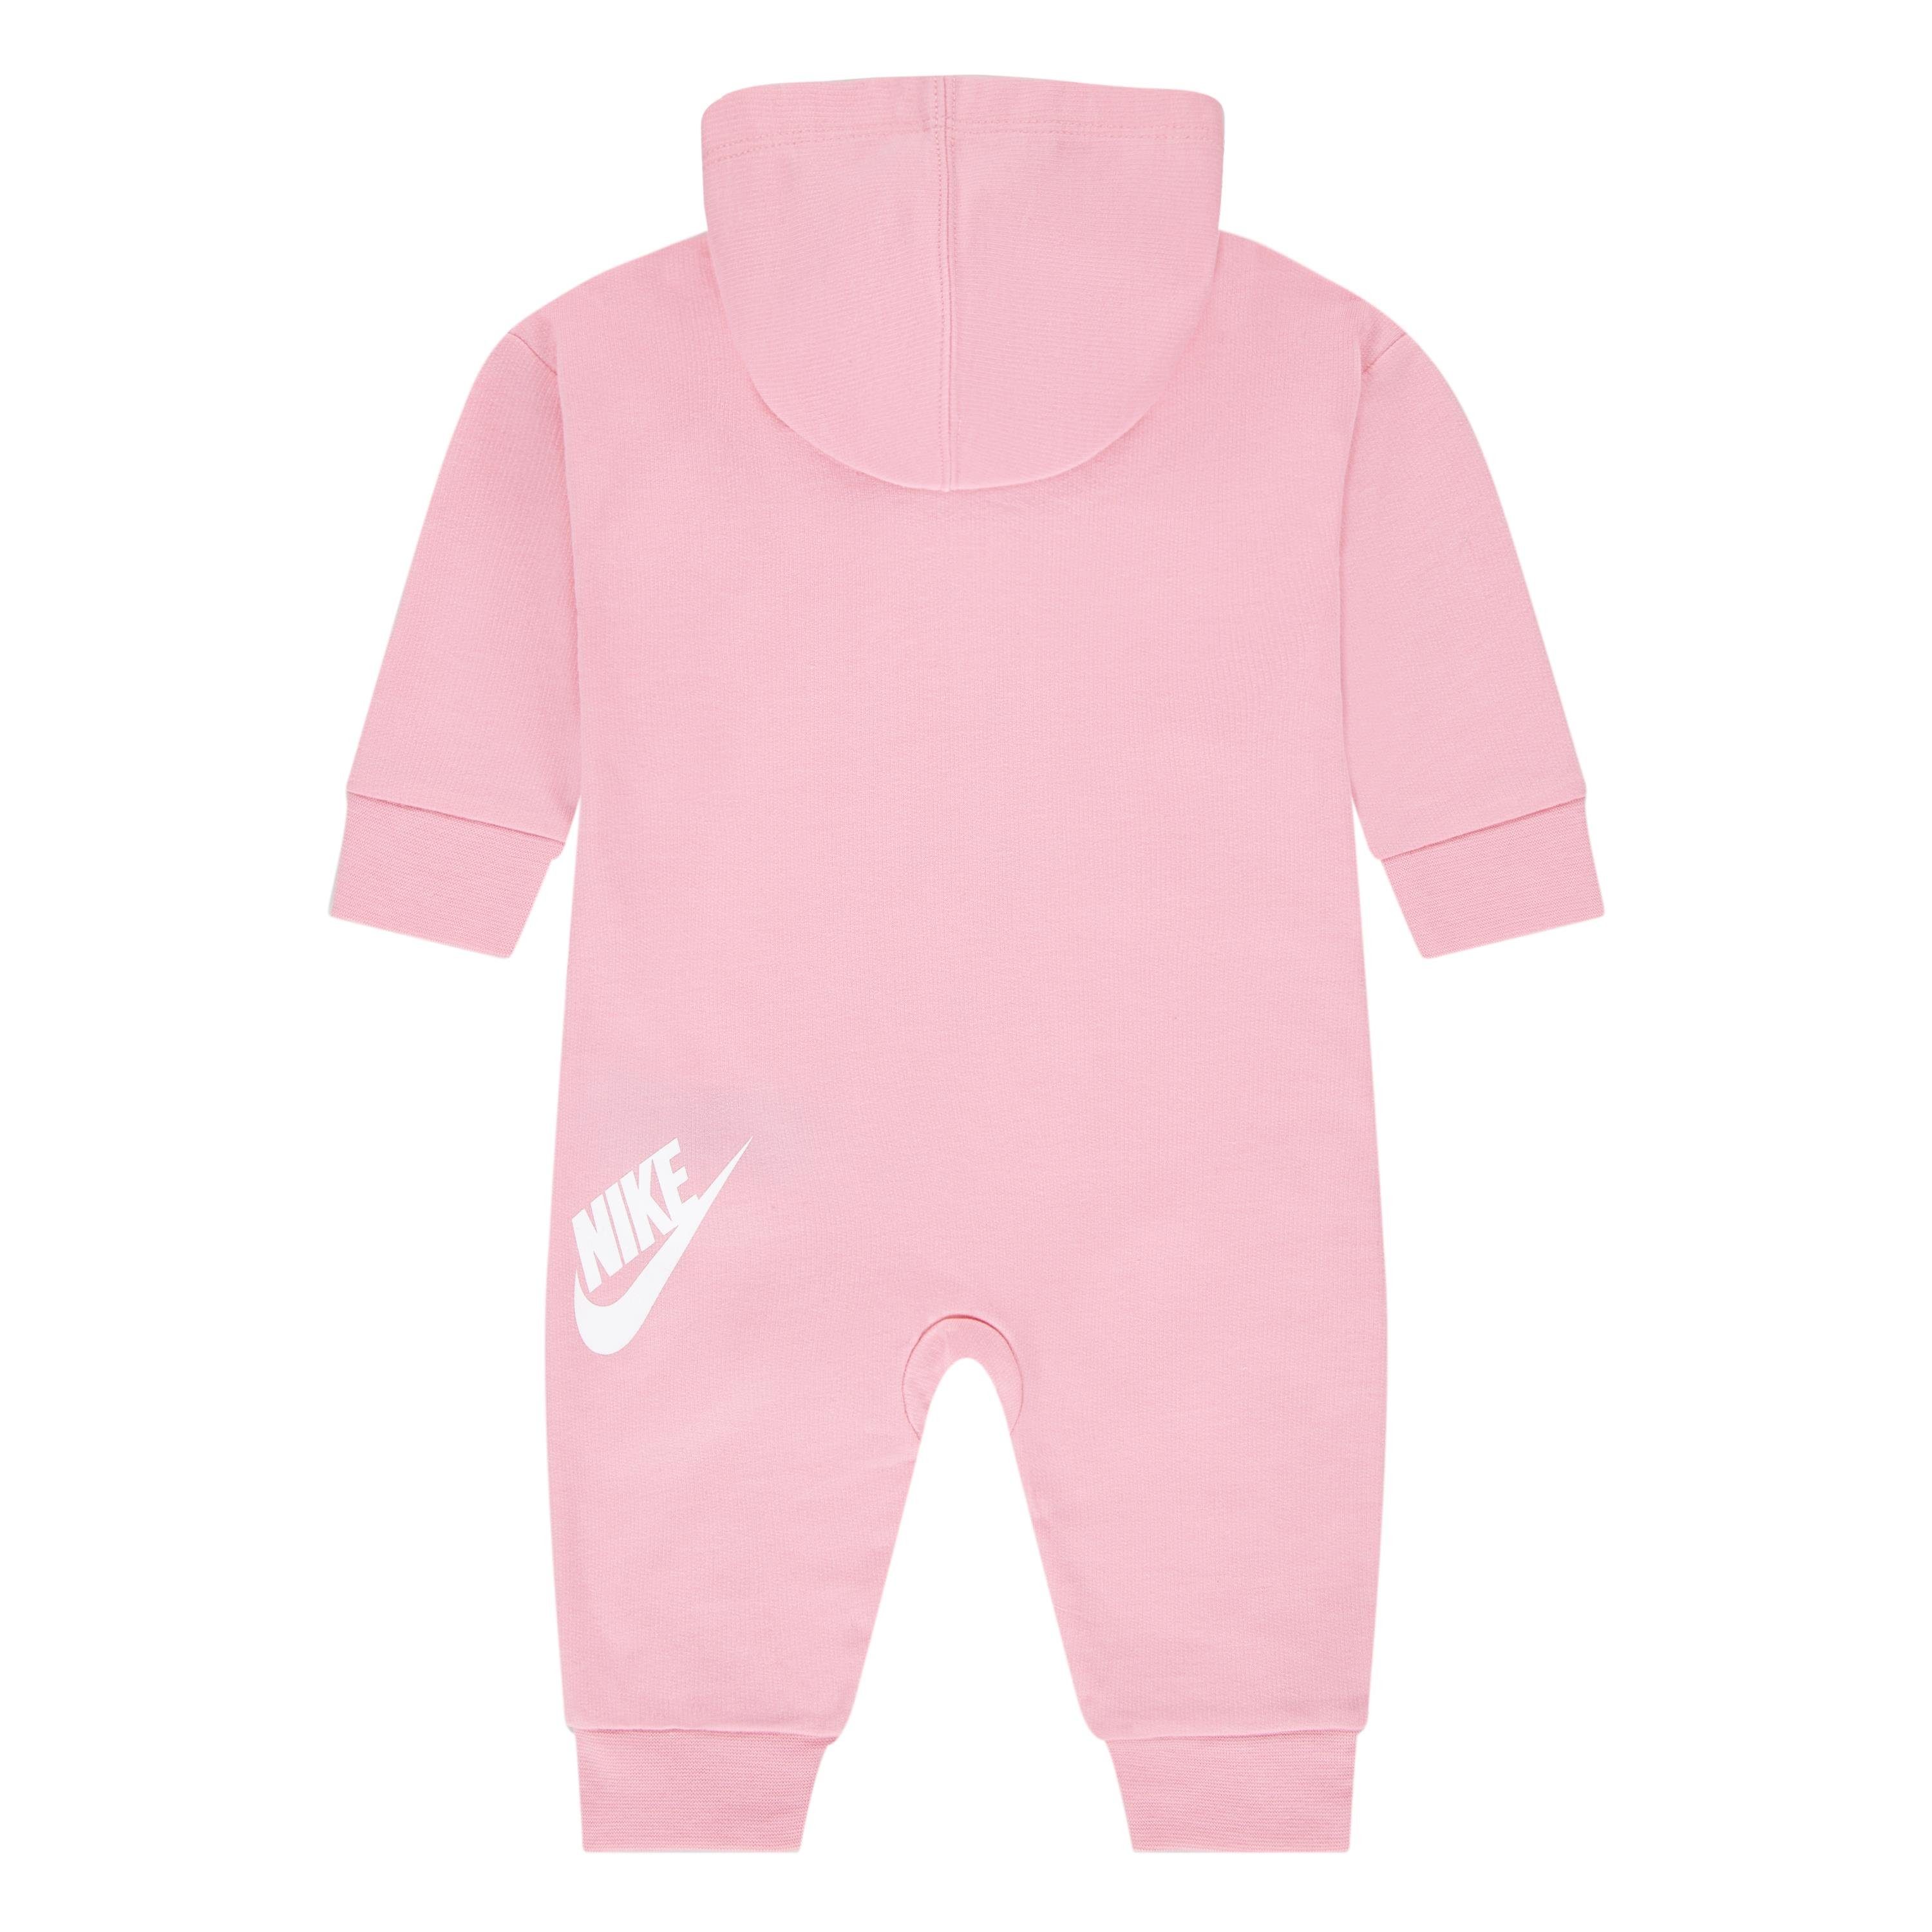 Nike Sportswear Strampler NKN ALL DAY rosa-weiß PLAY COVERALL